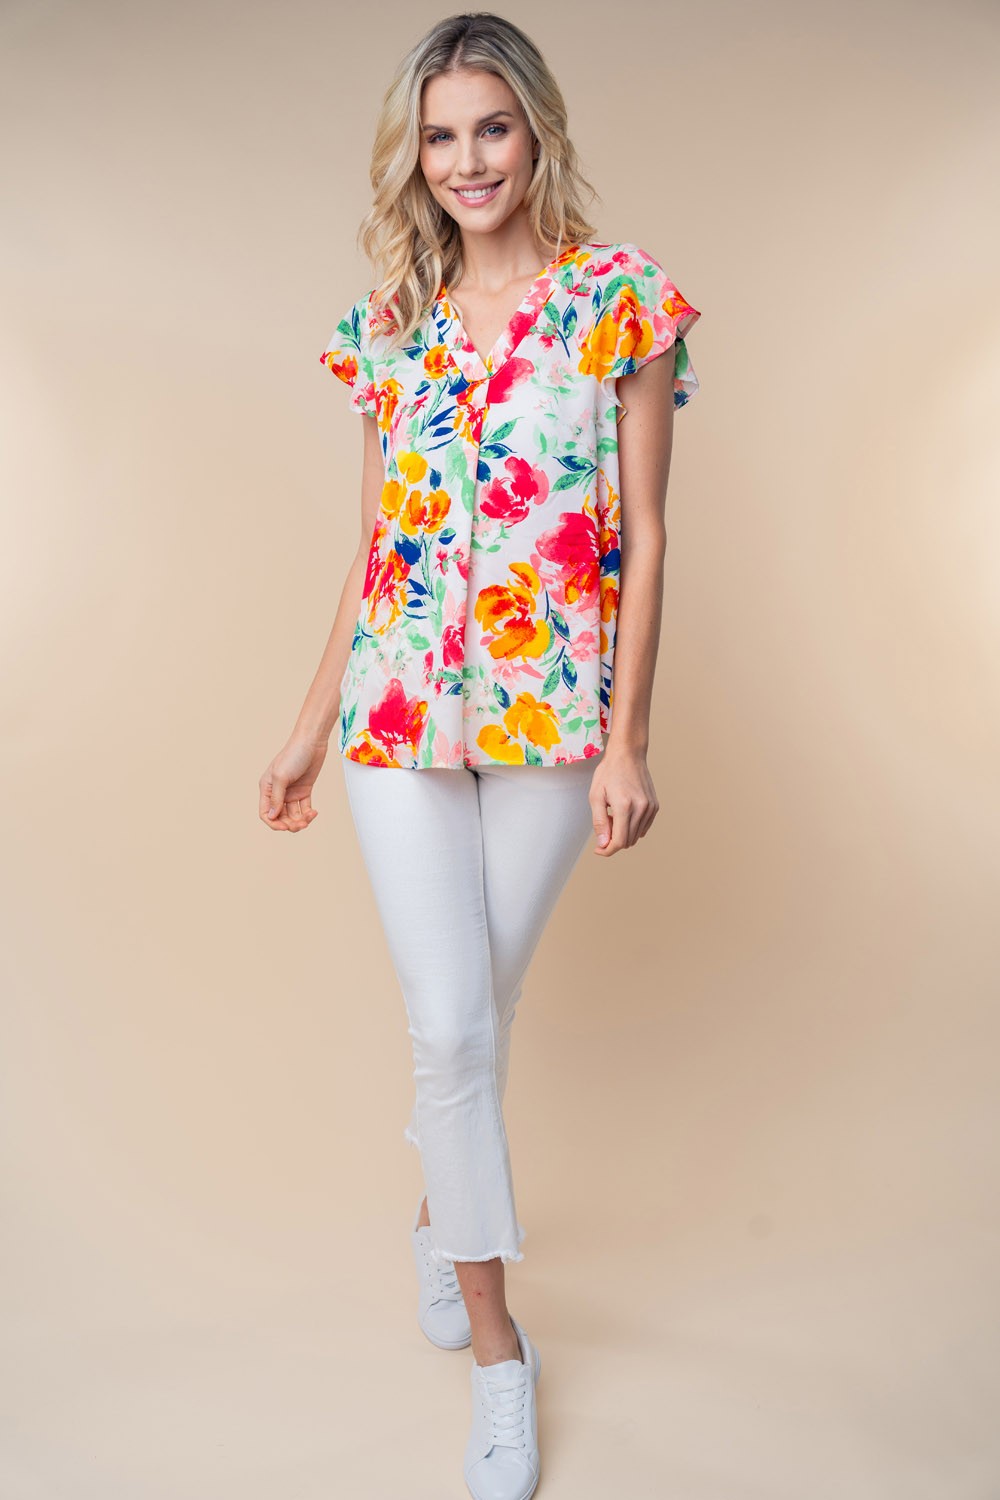 White Birch Full Size Short Sleeve Floral Woven Top-100 Short Sleeve Tops-Inspired by Justeen-Women's Clothing Boutique in Chicago, Illinois